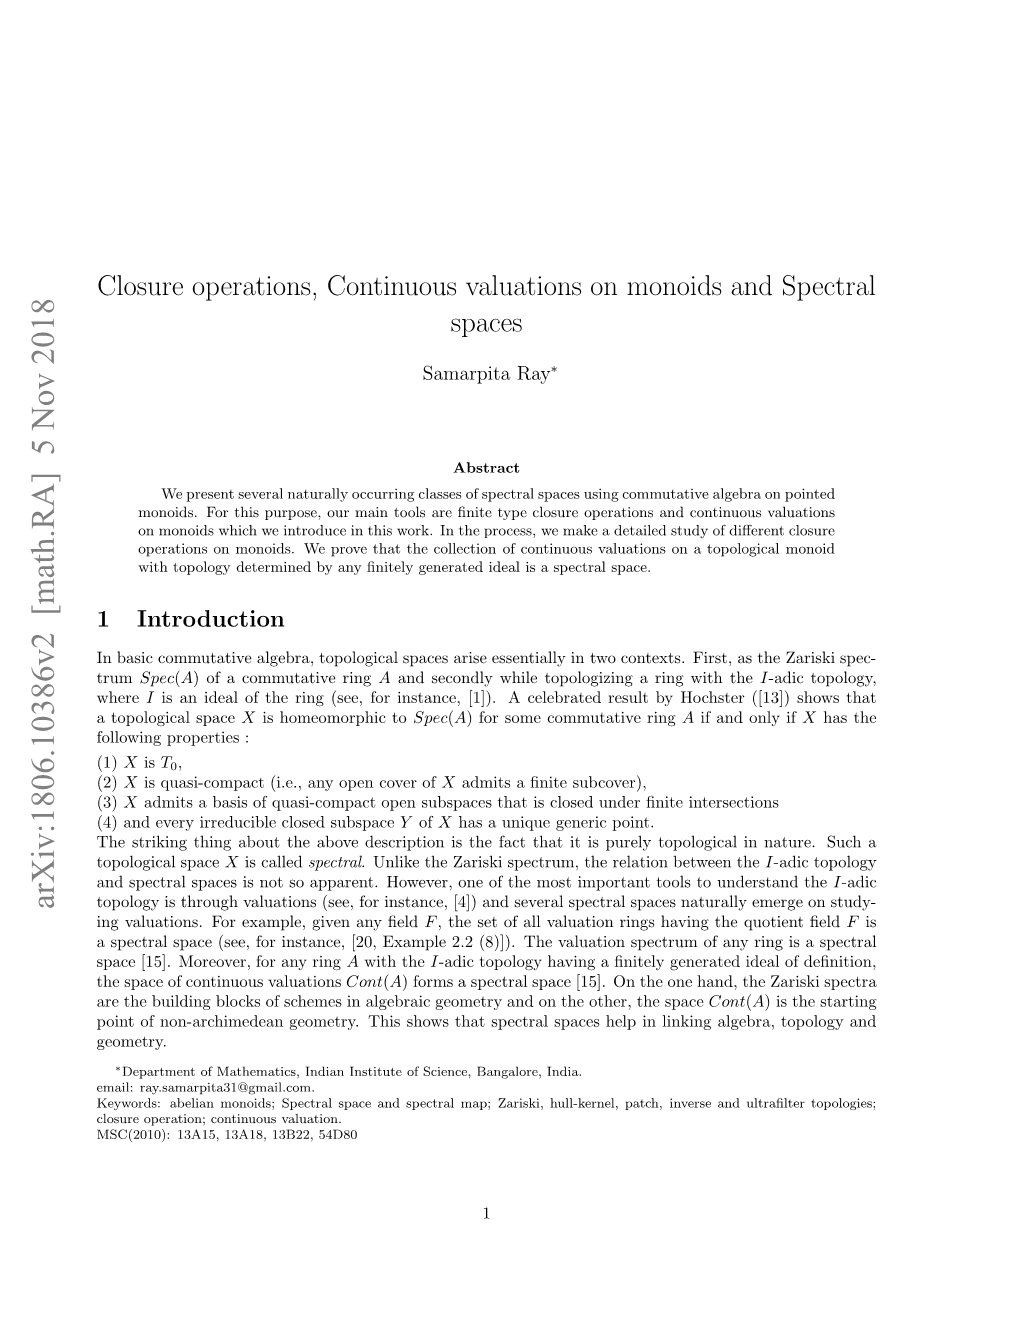 Closure Operations, Continuous Valuations on Monoids and Spectral